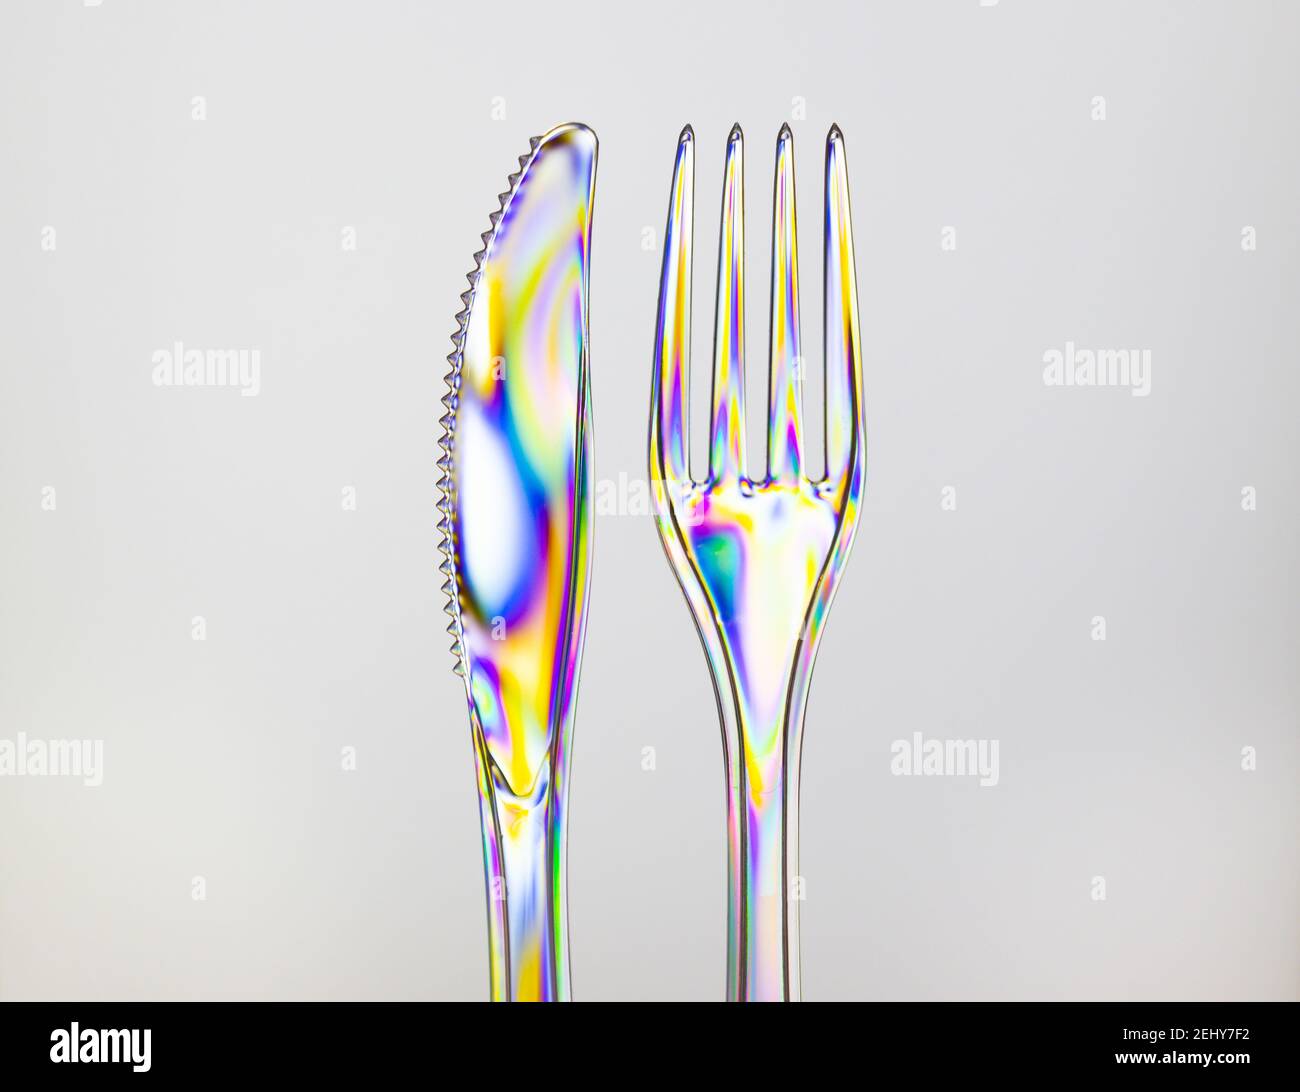 Transparent plastic fork and knife, rainbow colored by photoelasticity isolated on light gray background. Stock Photo